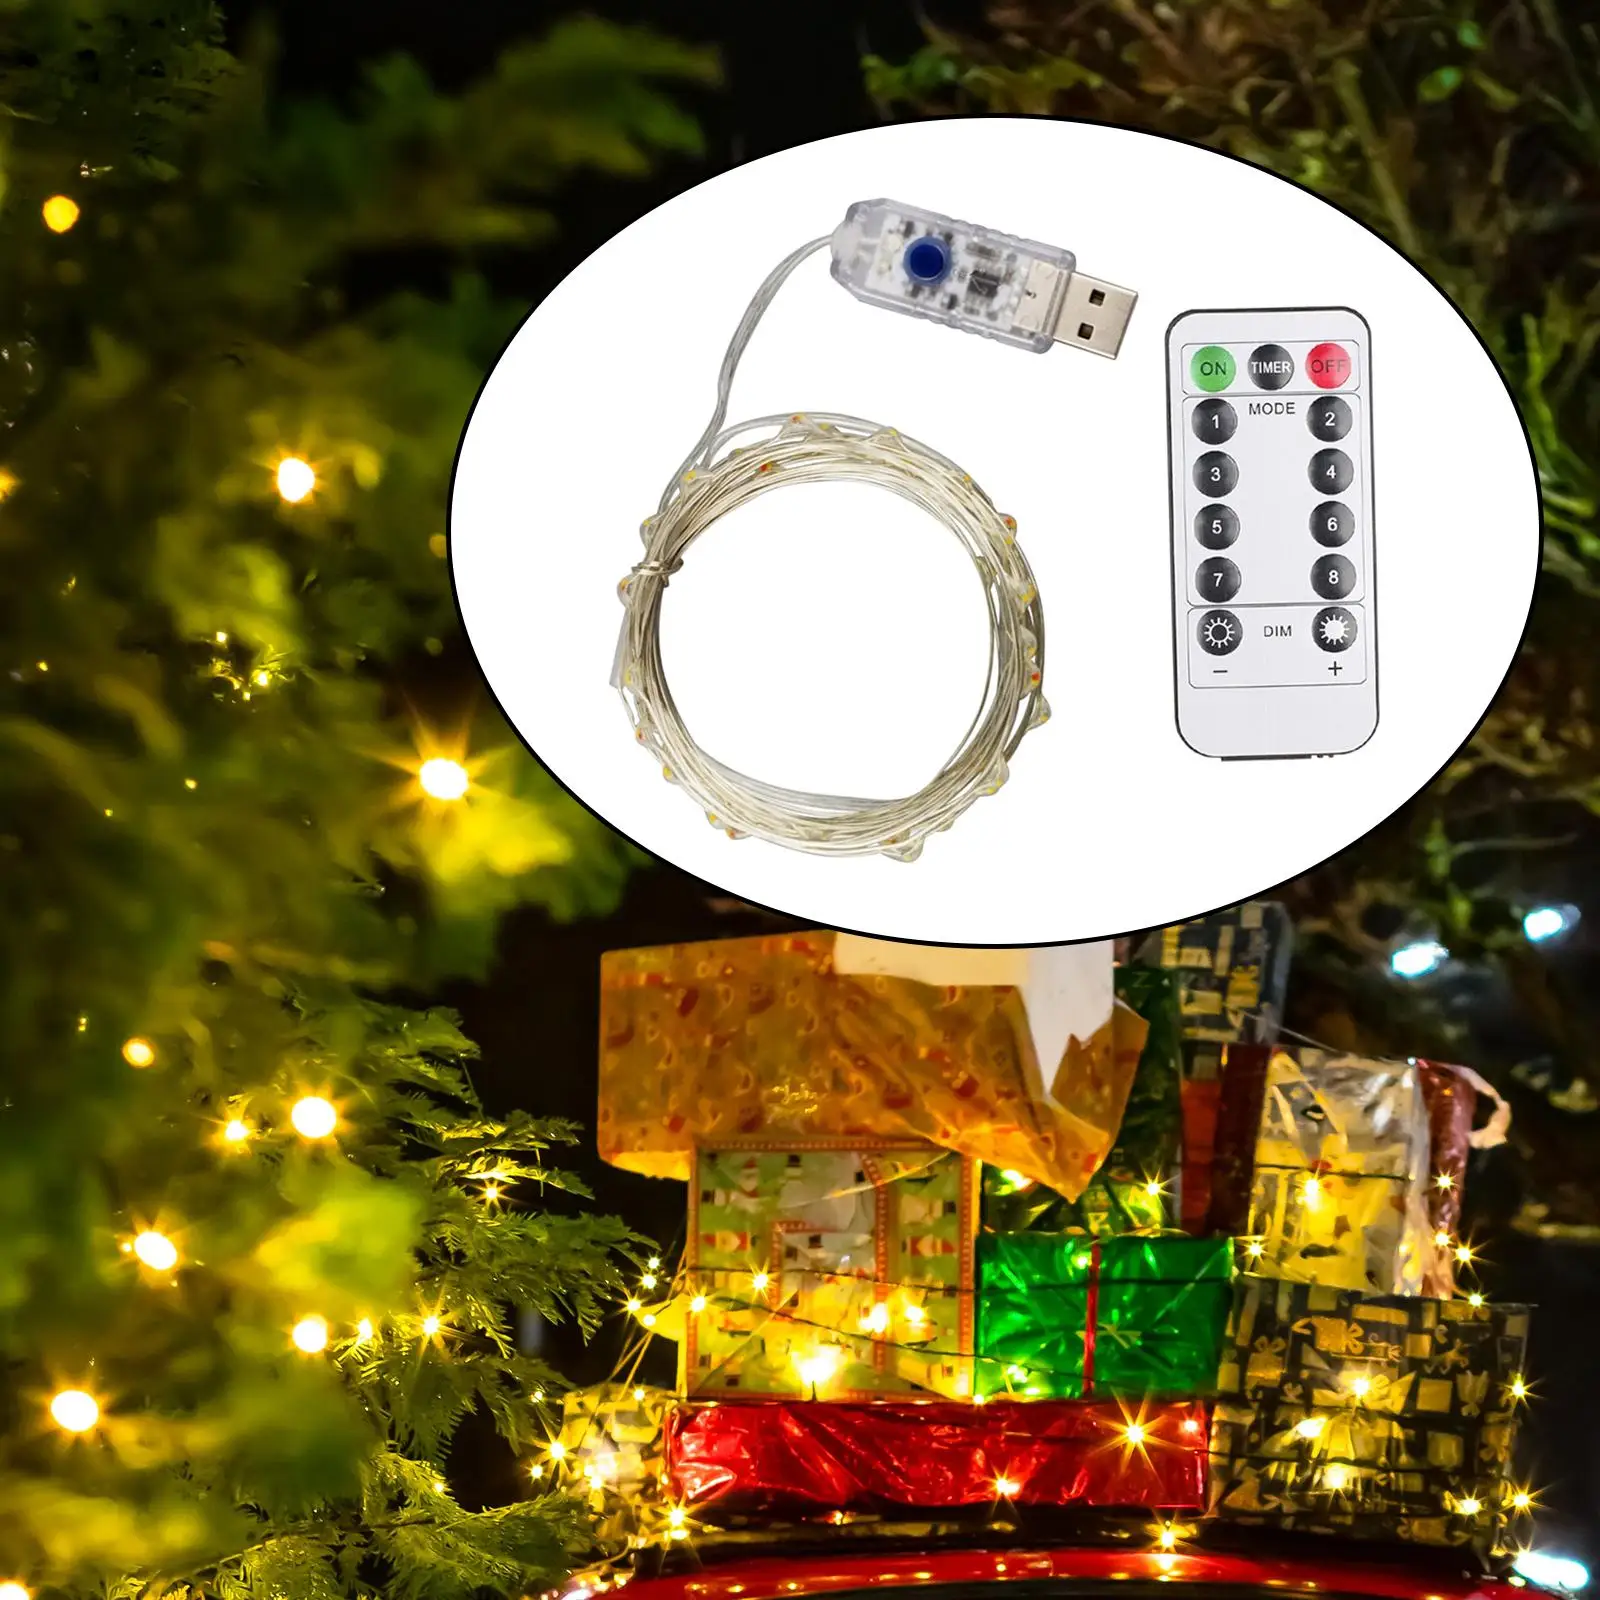 LED String Light with Remote Control Waterproof Lighting Christmas Light Lamp for Home Living Room Porch Yard Decoration